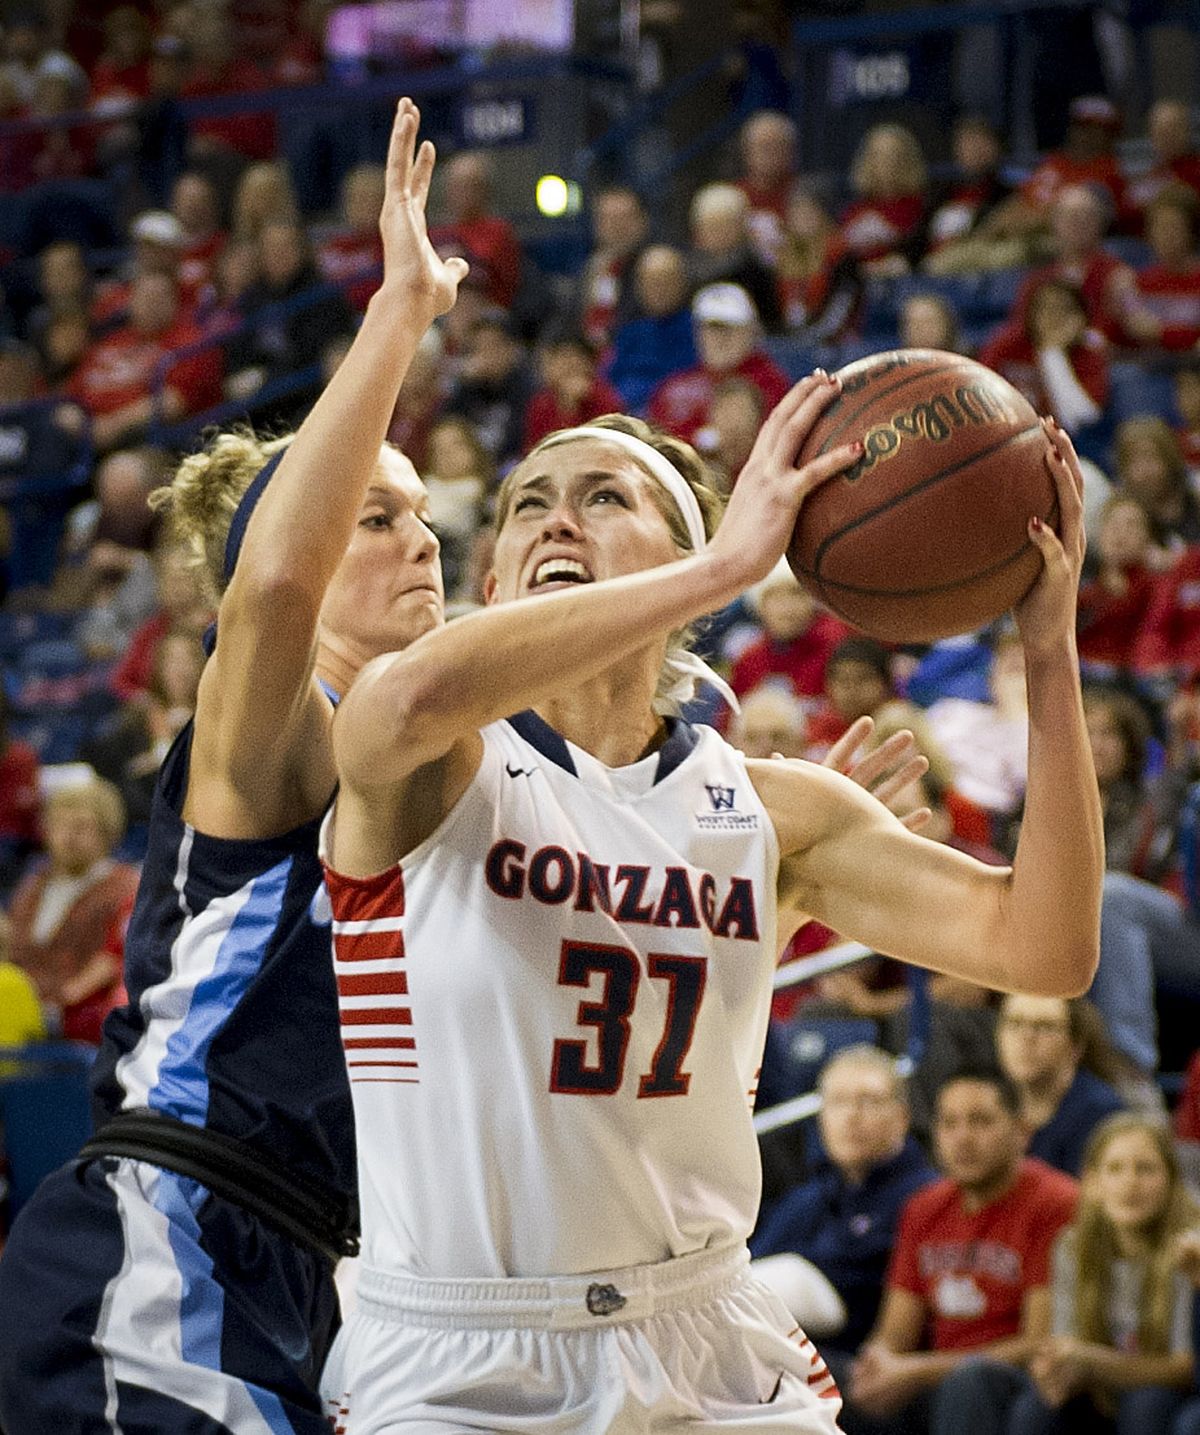 Gonzaga guard Elle Tinkle was on target with a career-high 26-point night against San Diego. (Colin Mulvany)